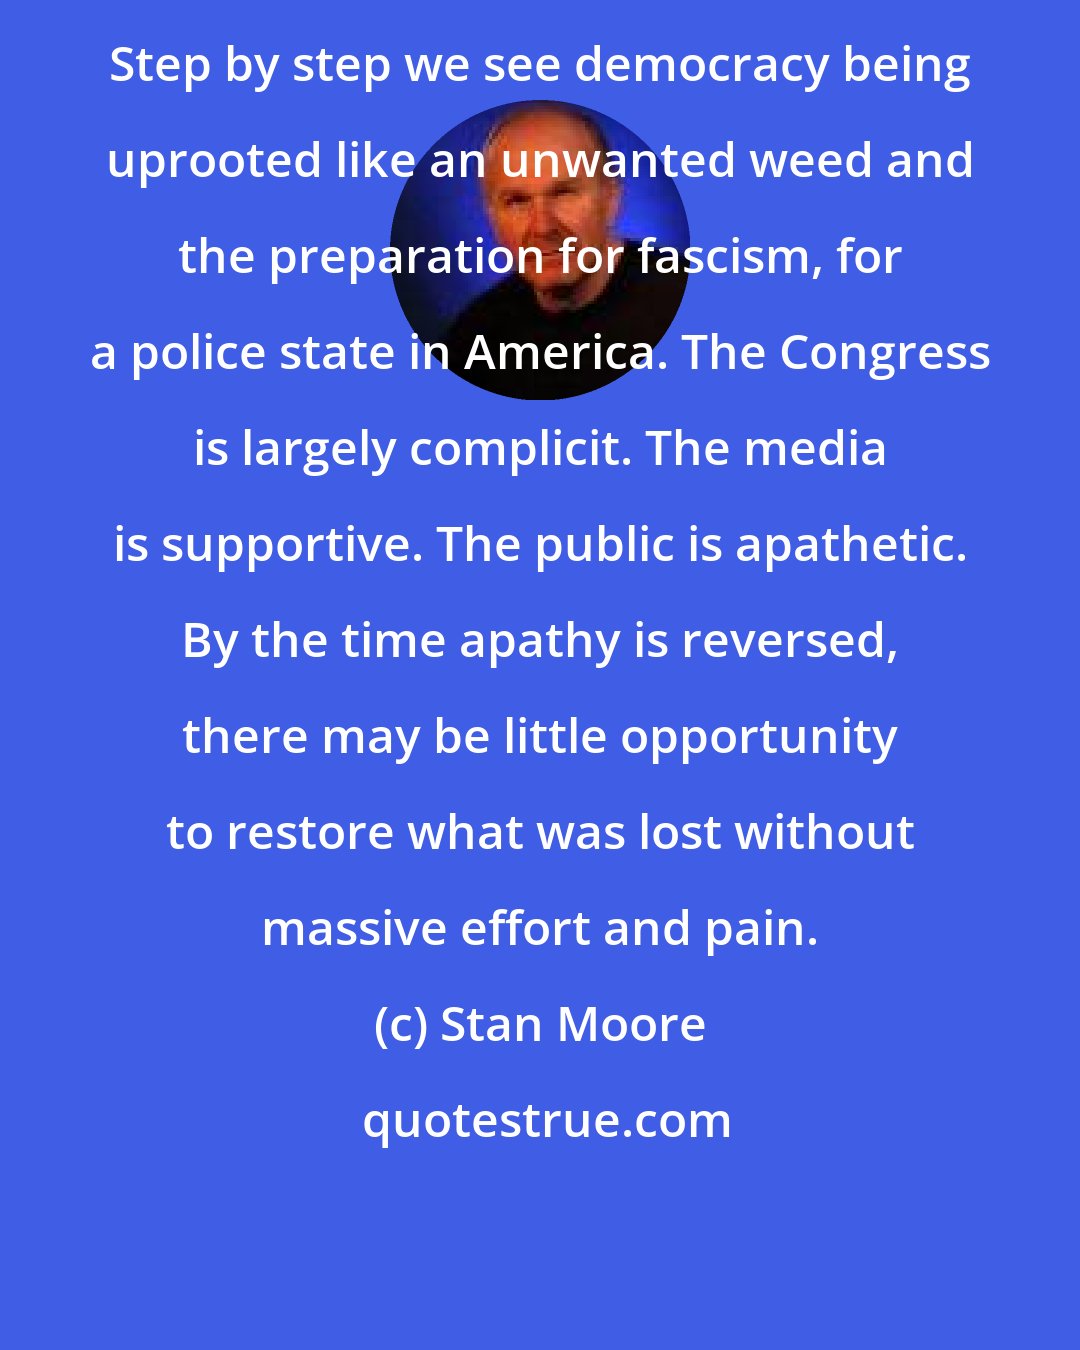 Stan Moore: Step by step we see democracy being uprooted like an unwanted weed and the preparation for fascism, for a police state in America. The Congress is largely complicit. The media is supportive. The public is apathetic. By the time apathy is reversed, there may be little opportunity to restore what was lost without massive effort and pain.